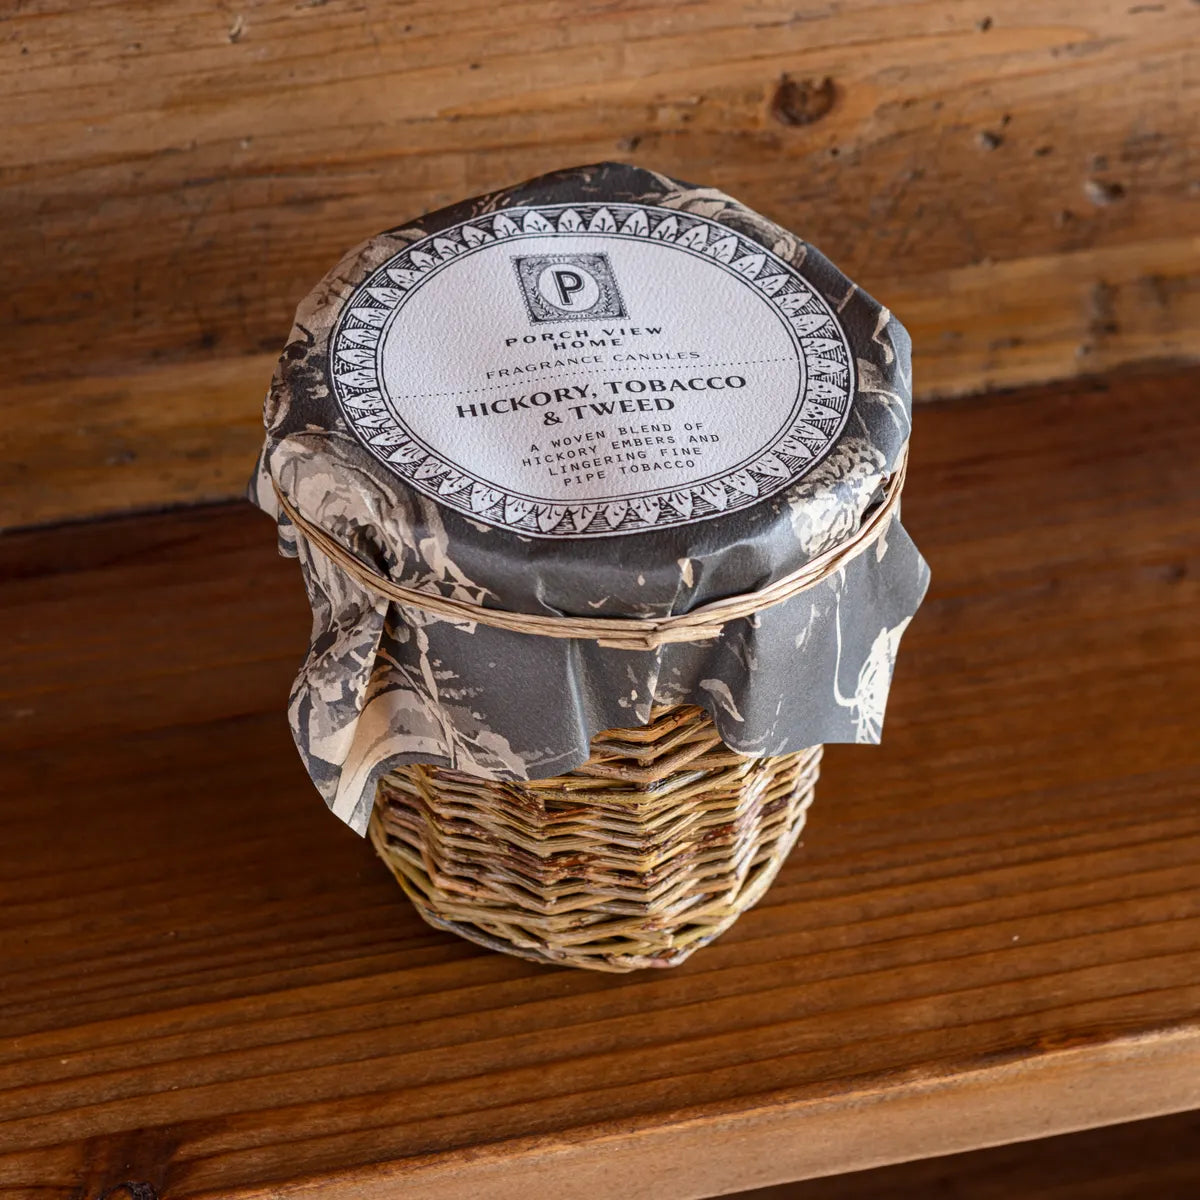 HICKORY TOBACCO & TWEED CANDLE